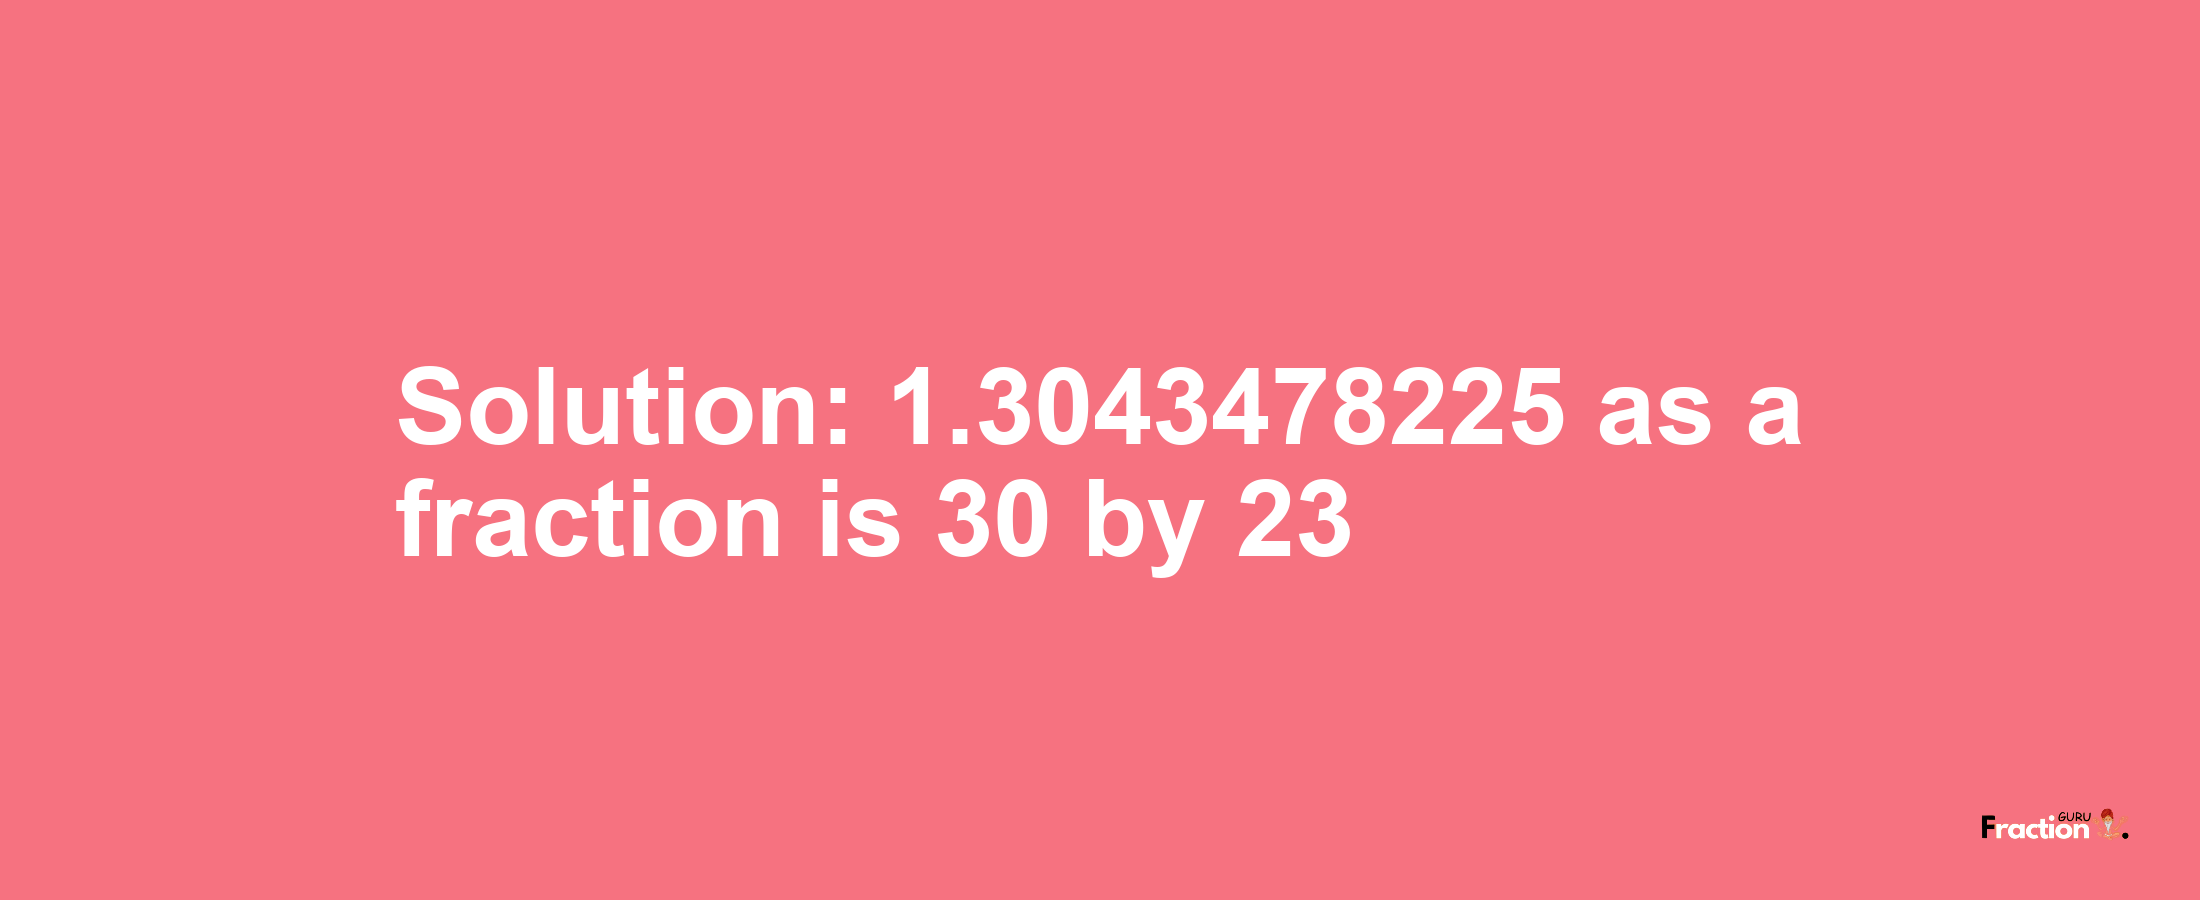 Solution:1.3043478225 as a fraction is 30/23